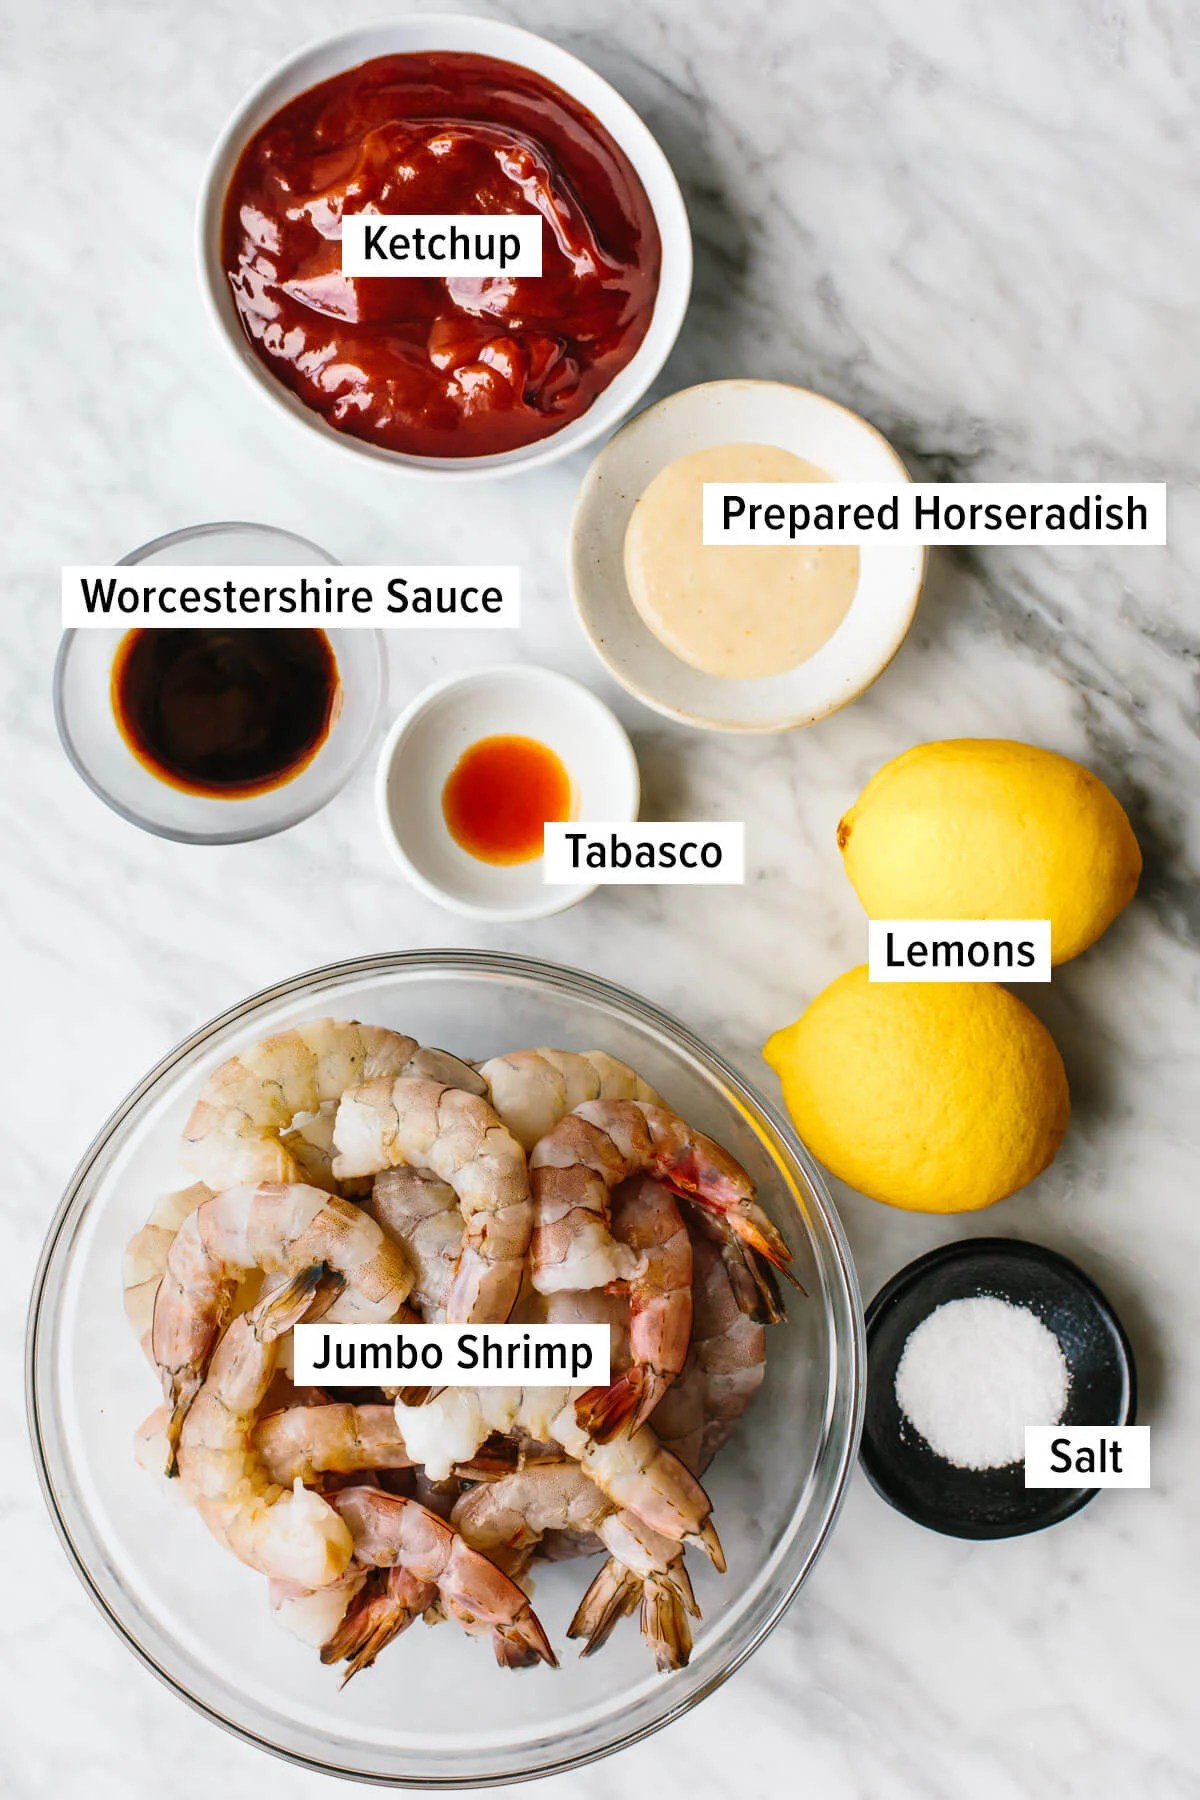 Ingredients for shrimp cocktail on a table